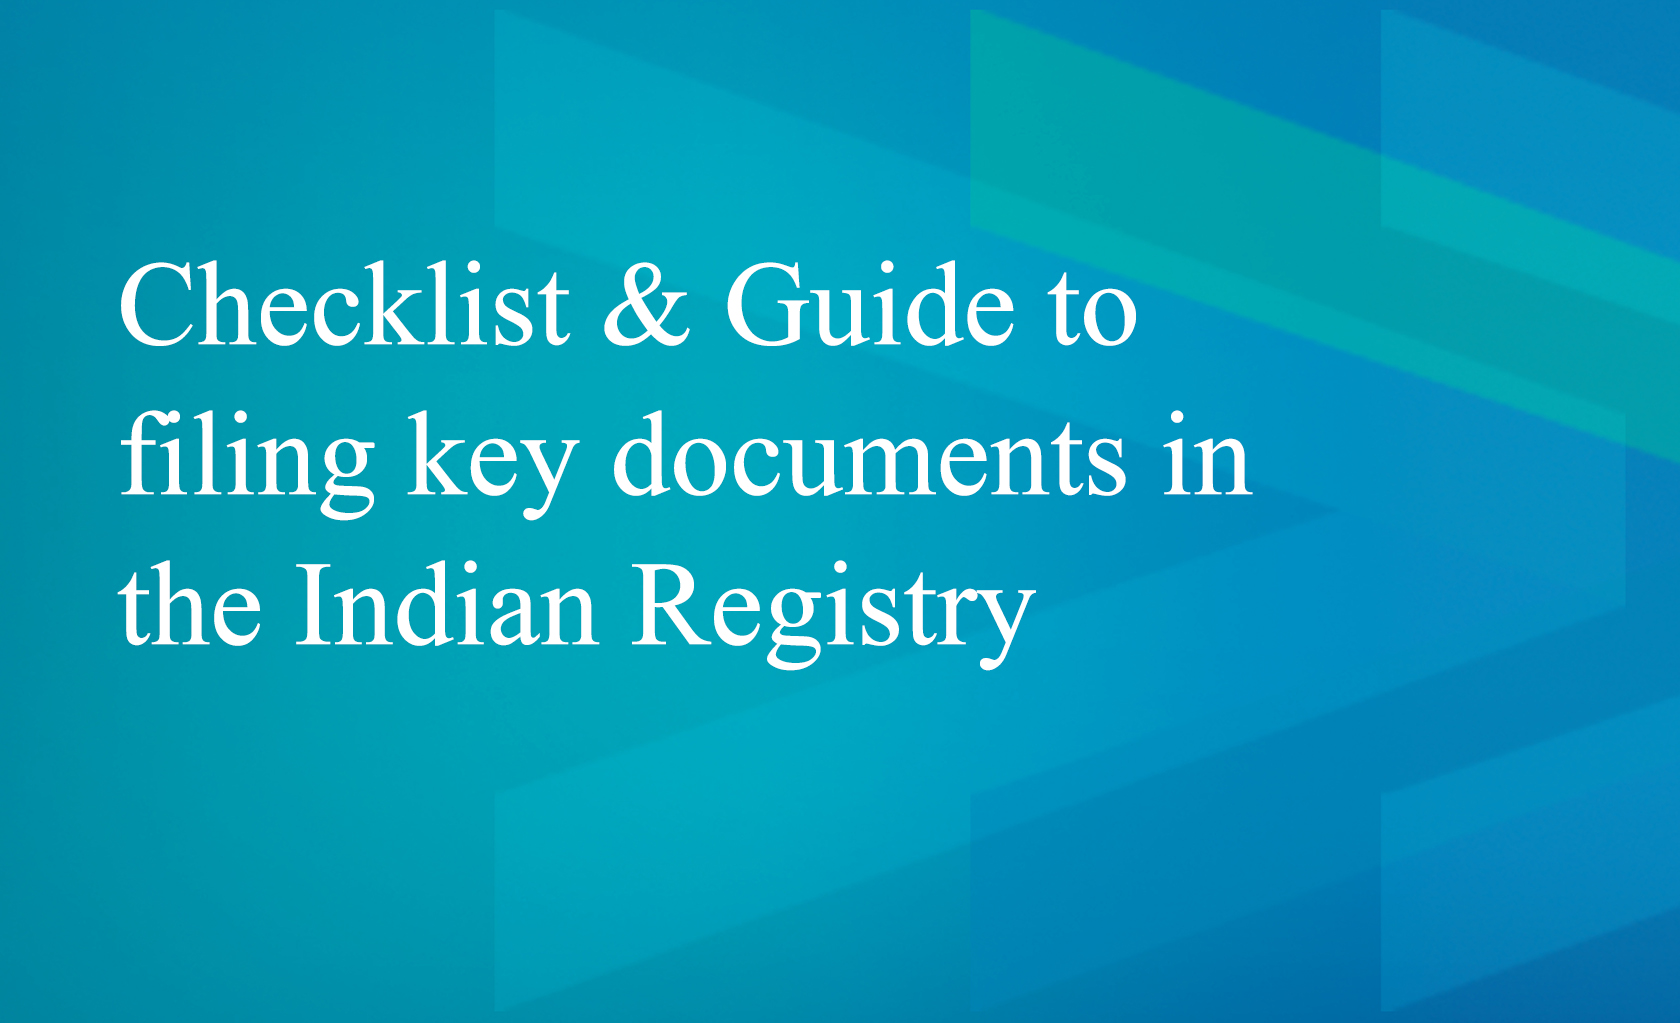 CHECKLIST & GUIDE TO FILING KEY DOCUMENTS IN THE INDIAN REGISTRY